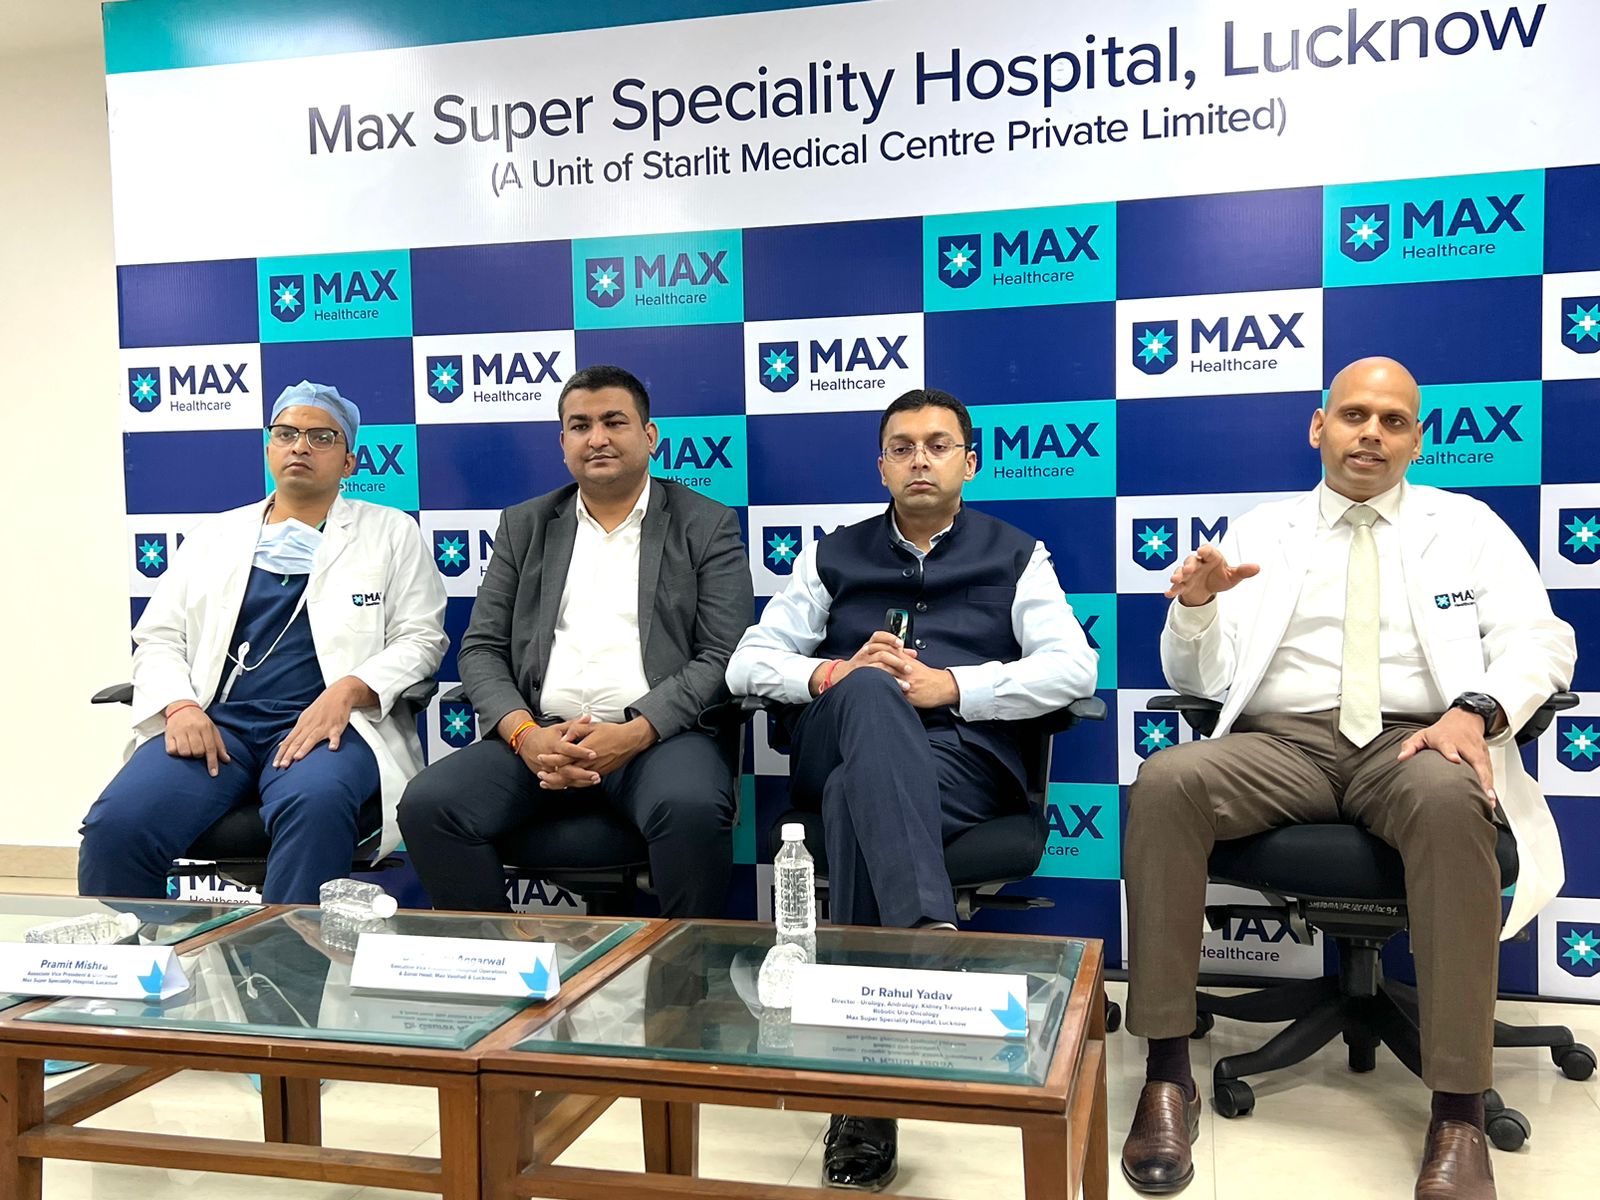 Lucknow residents can now avail state-of-the-art robotic surgery facility at Max Hospital